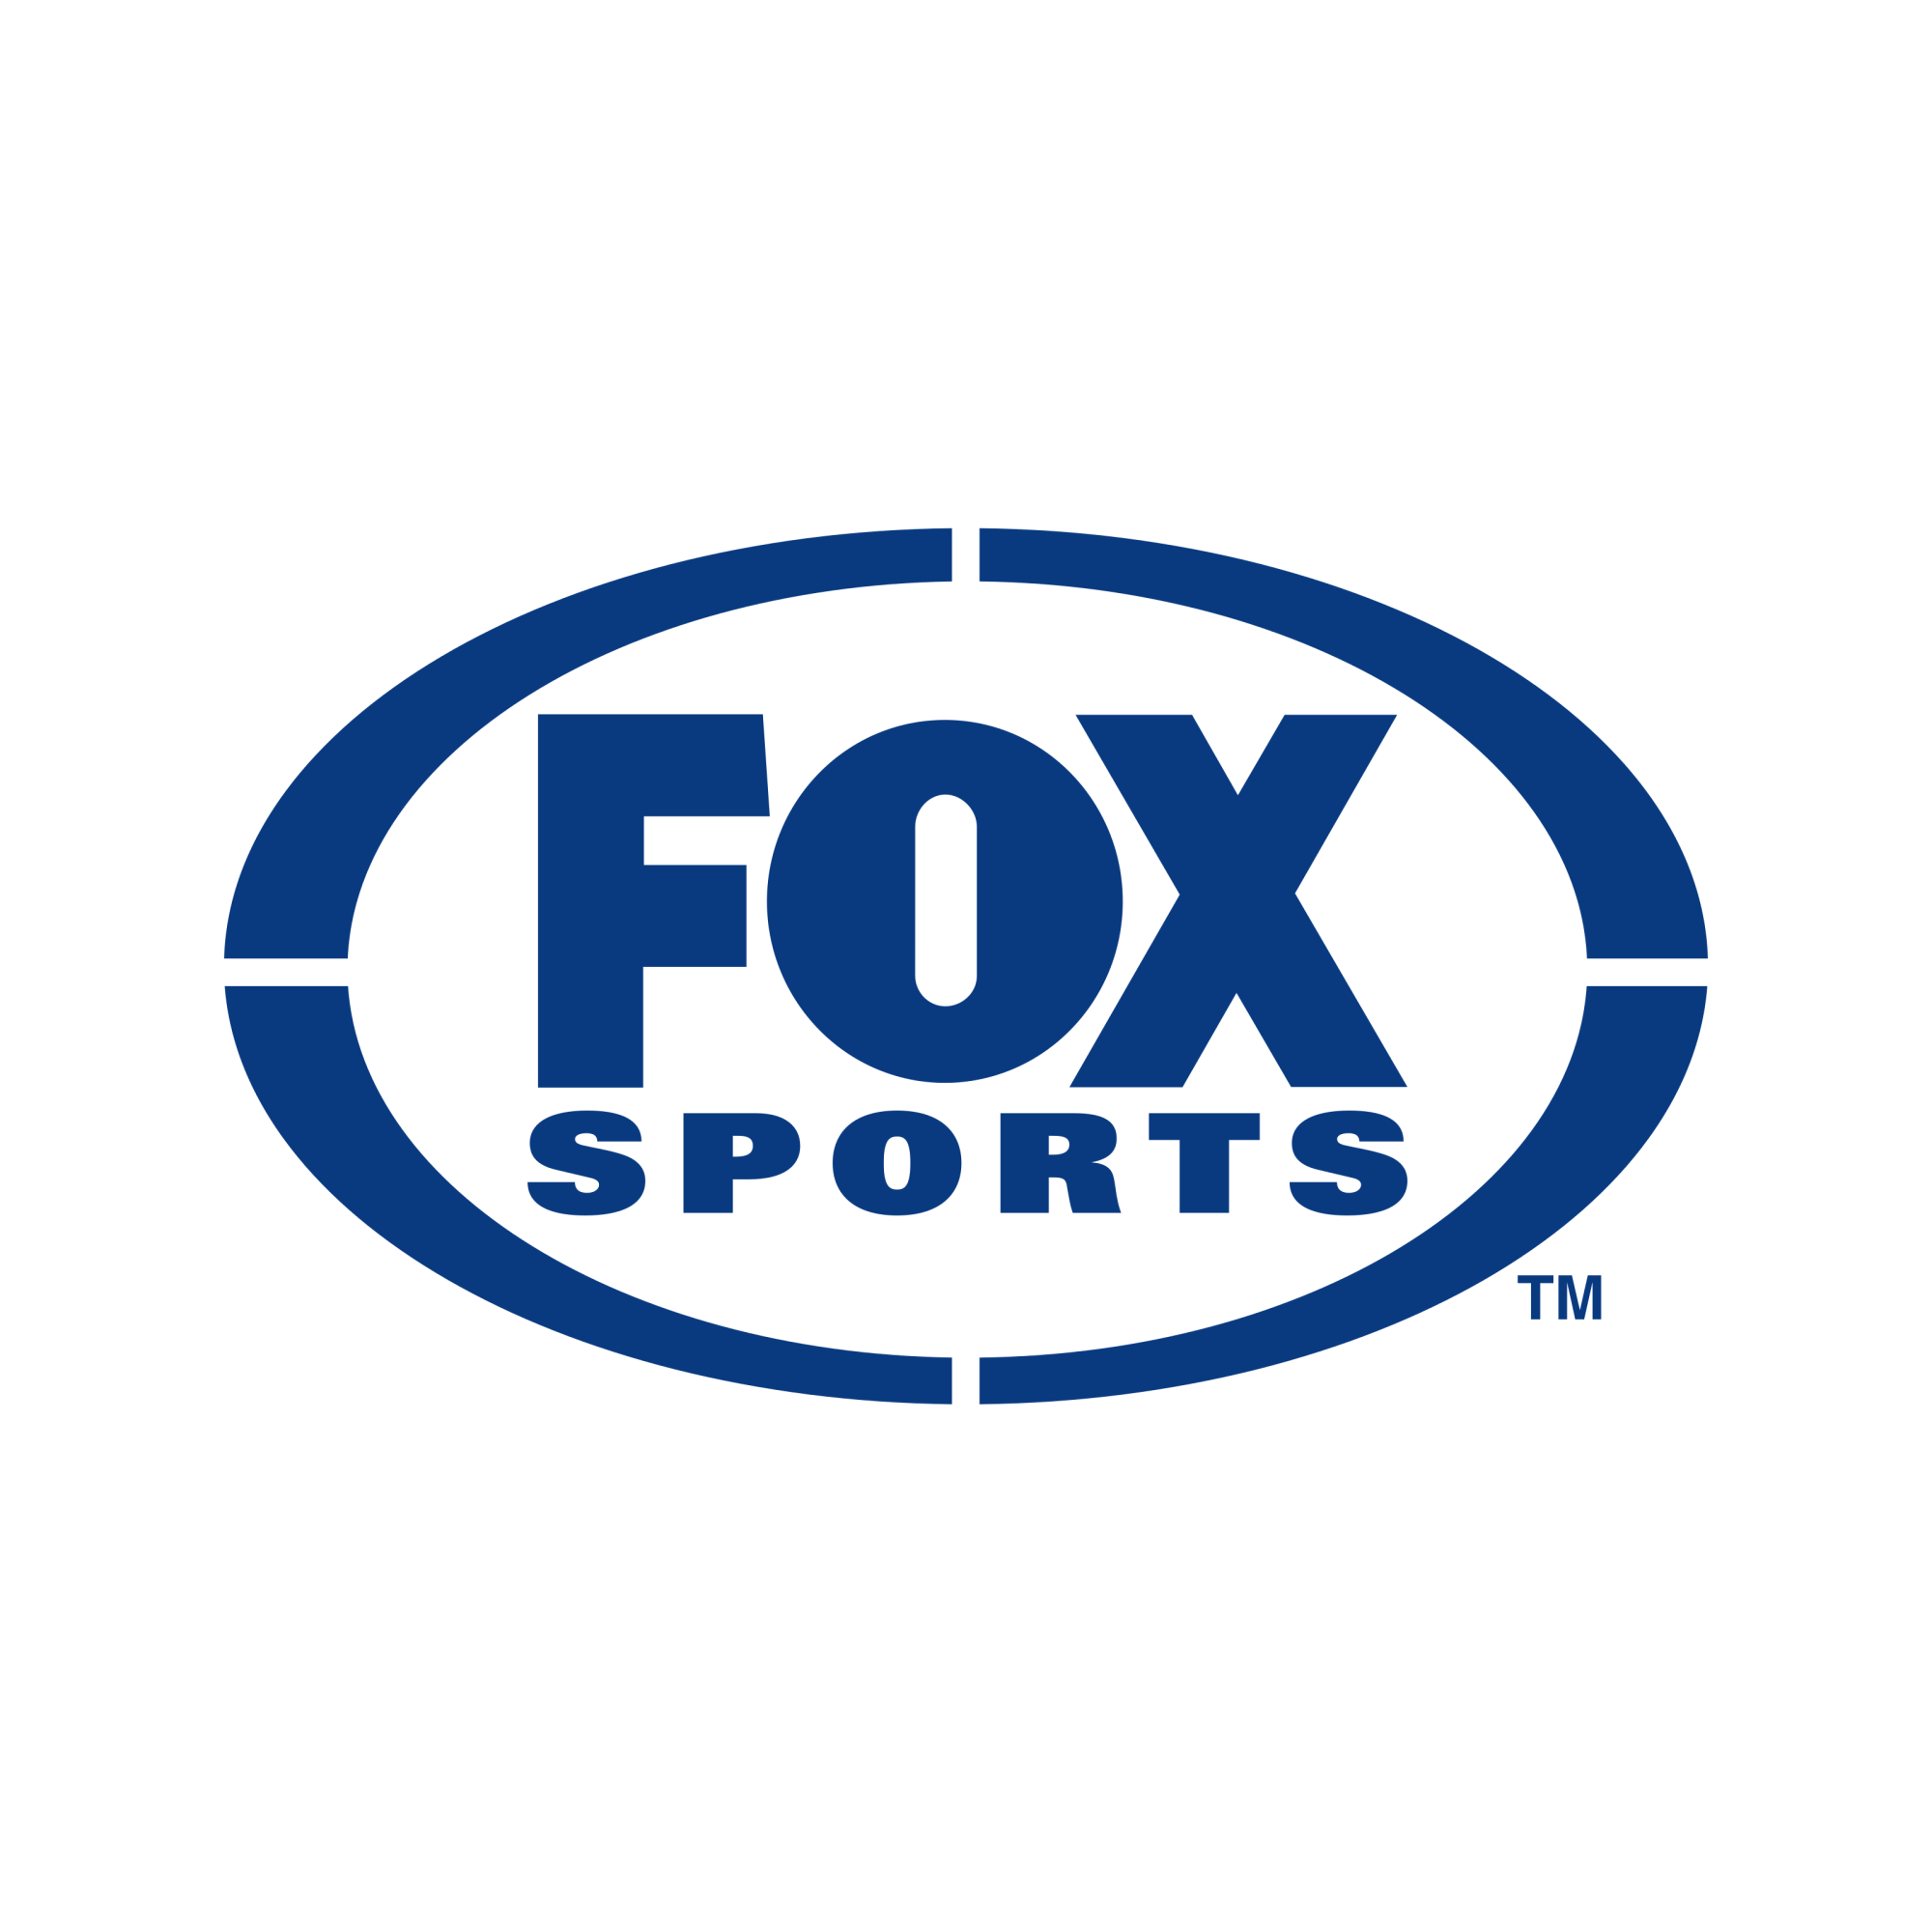 FEATURED ON FOX SPORTS